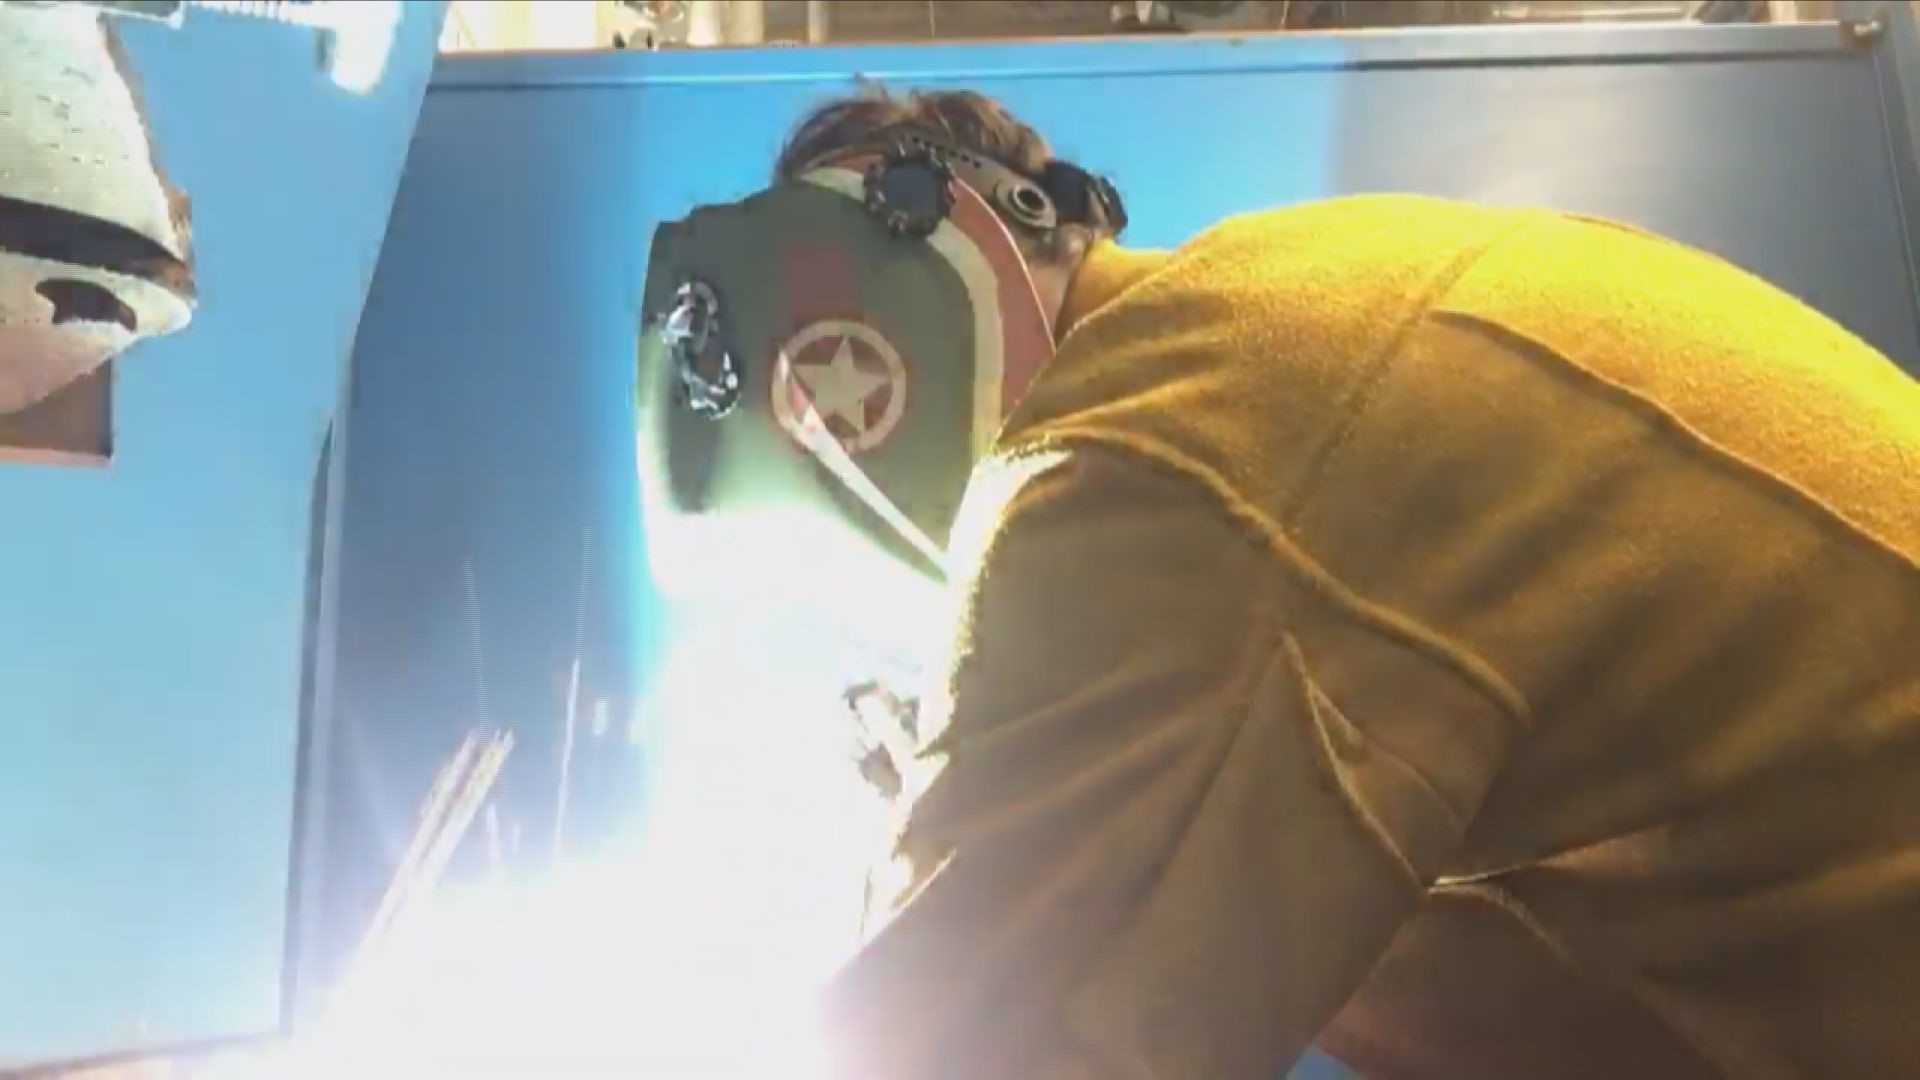 The idea behind the partnership and Delta College's welding program is to give students the job skills they need to get in a new career while helping financially.